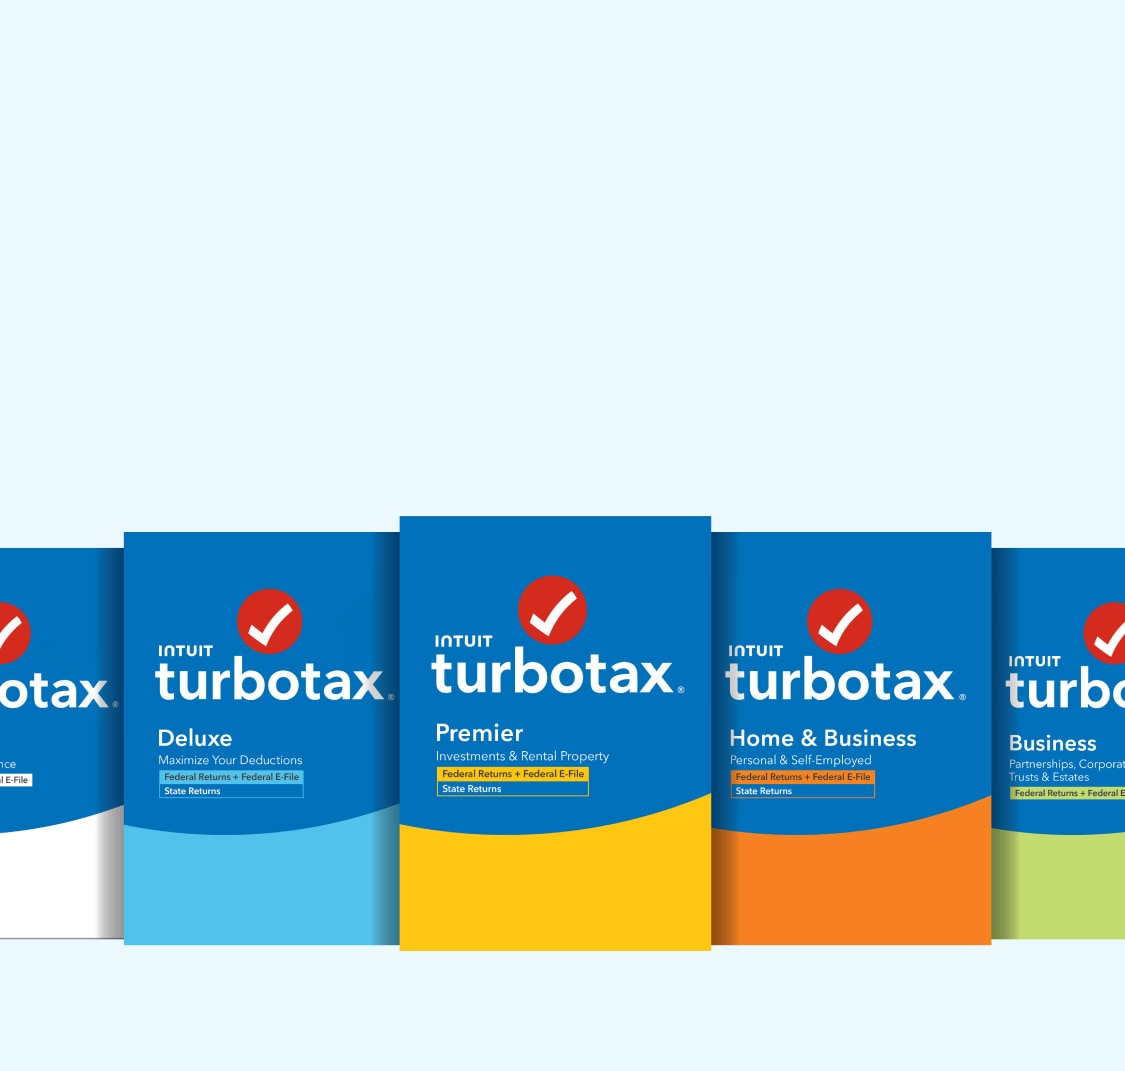 list of turbotax products and comparison